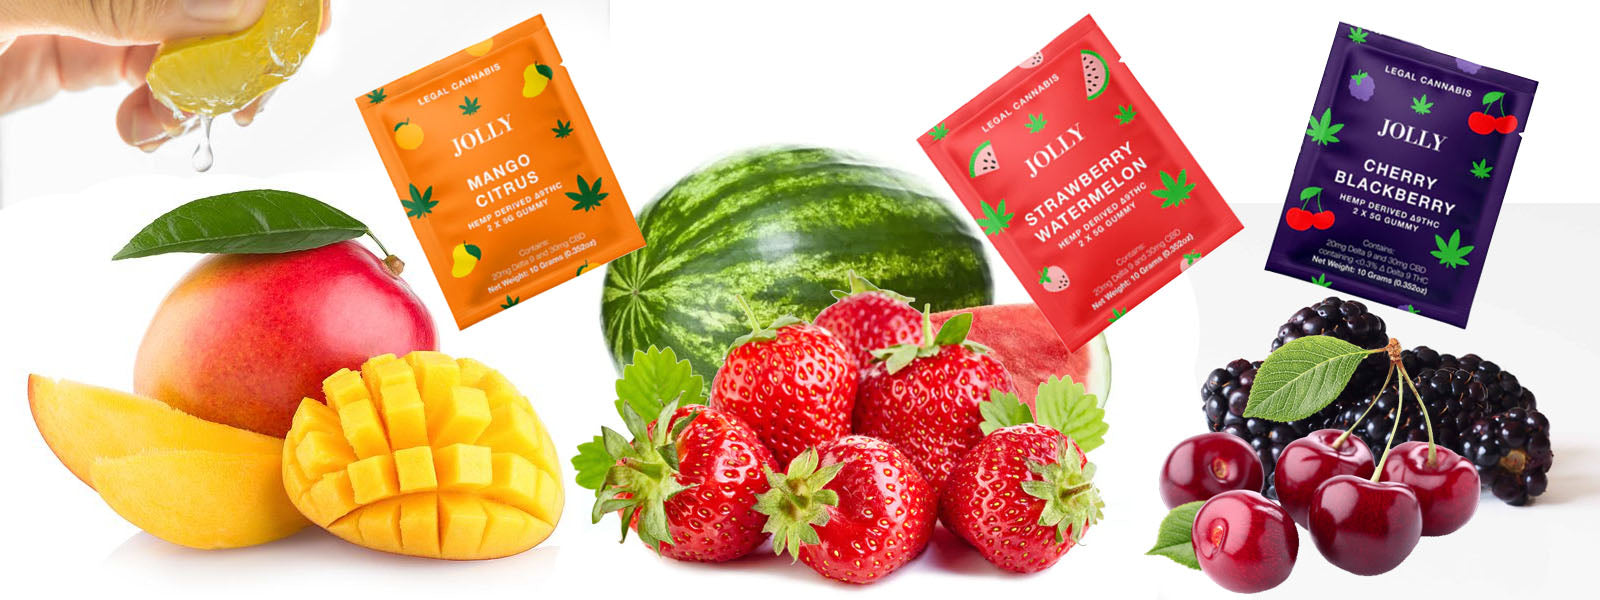 Jolly Cannabis Gummies available in Mango Citrus, Cherry Blackberry and Strawberry Watermelon